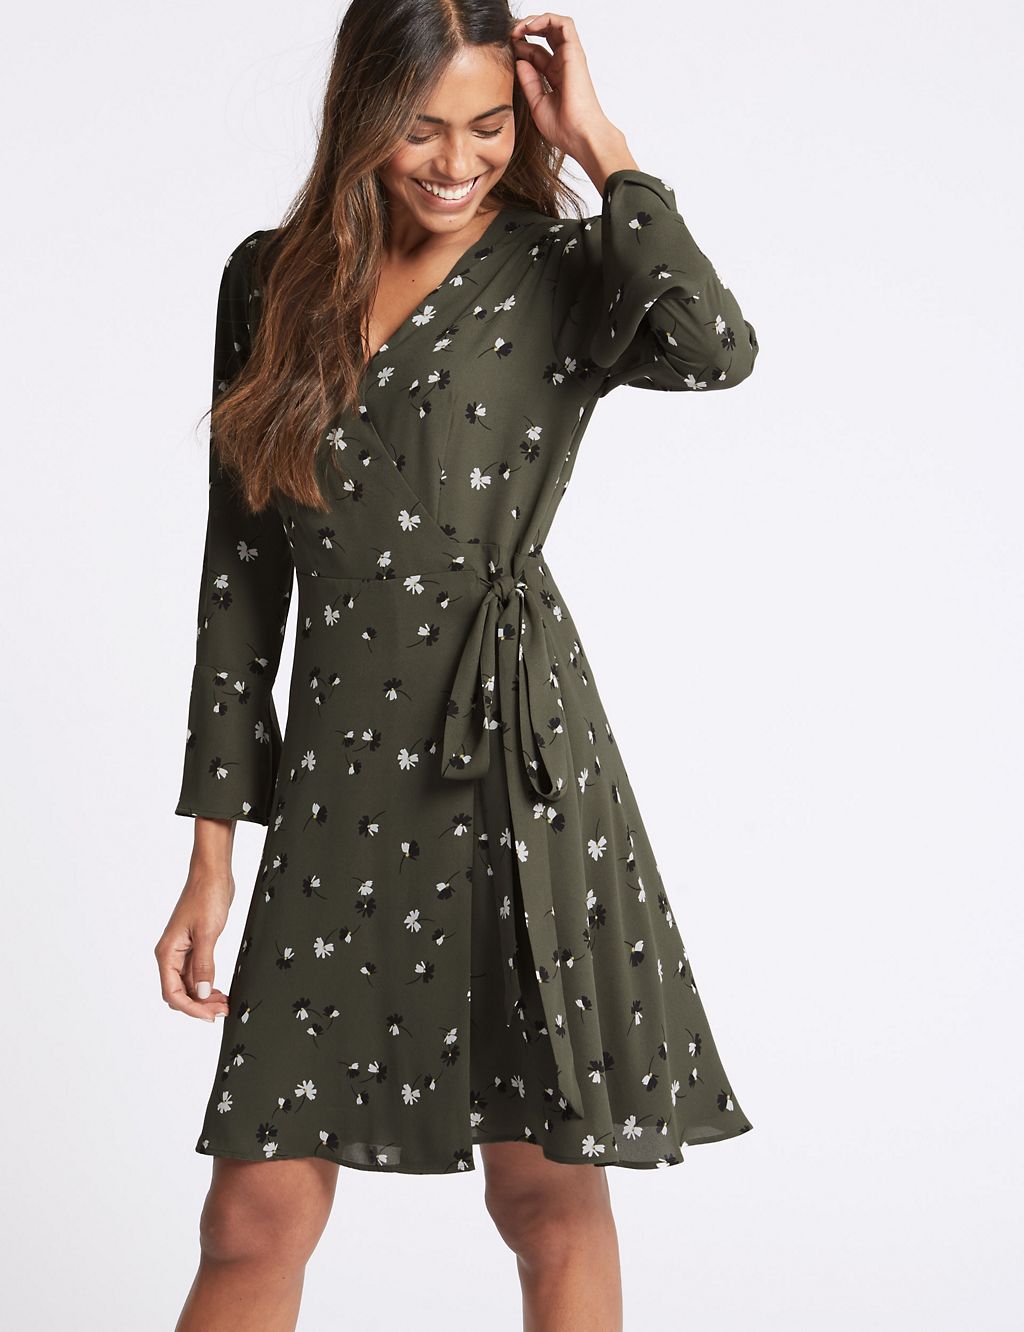 Floral print Long Sleeve Wrap Dress | M&S Collection | M&S